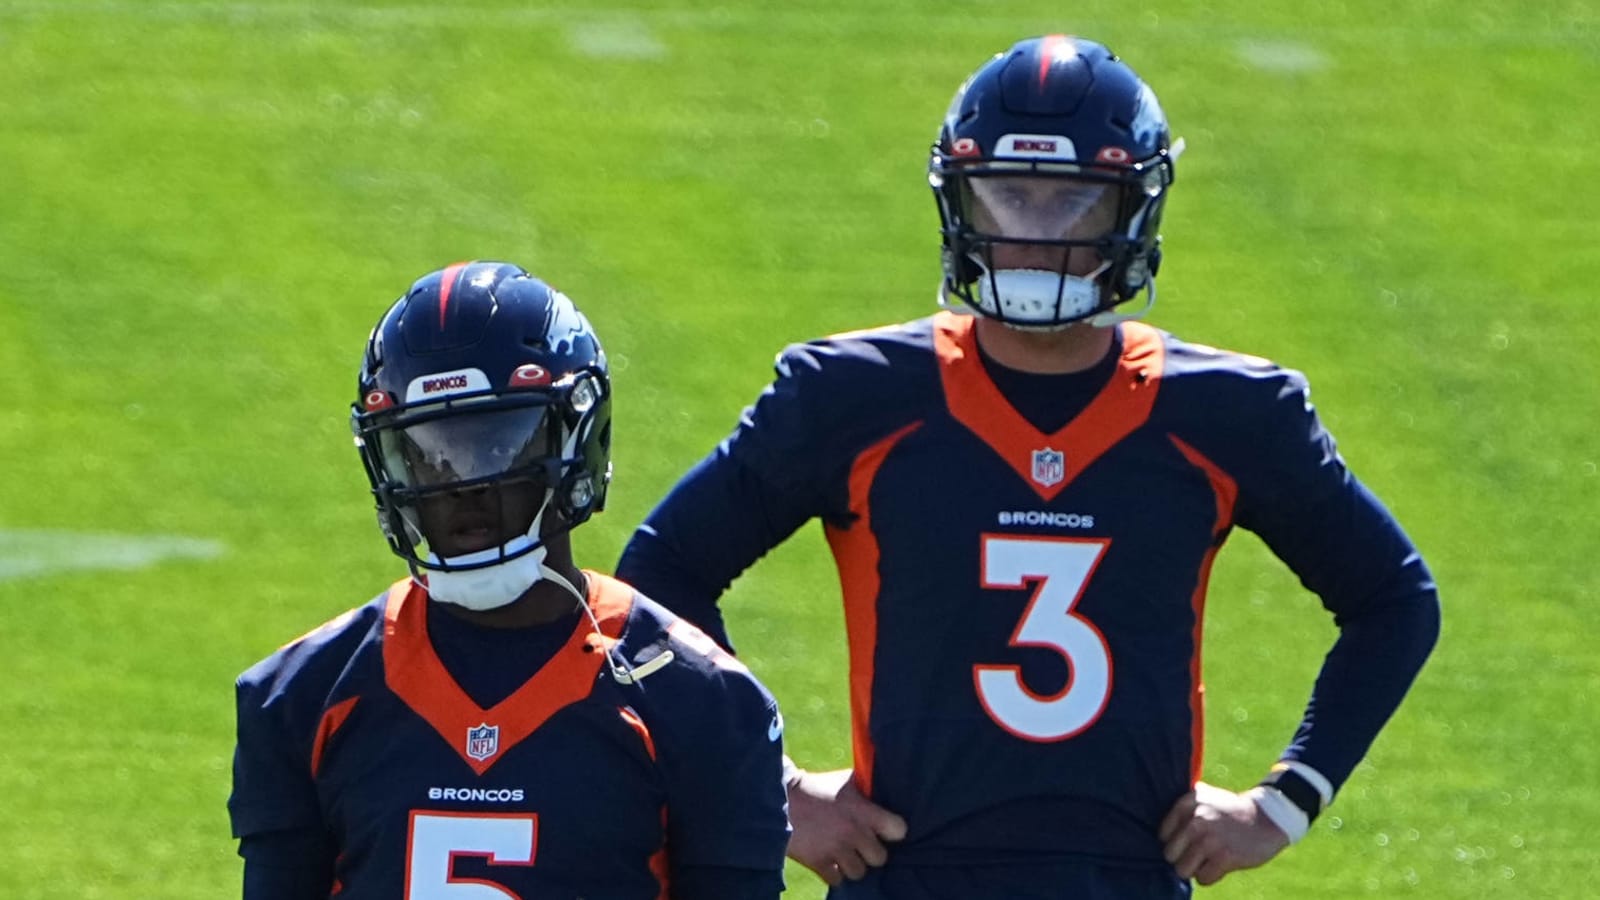 Broncos GM has interesting take about passing up on QB in NFL Draft